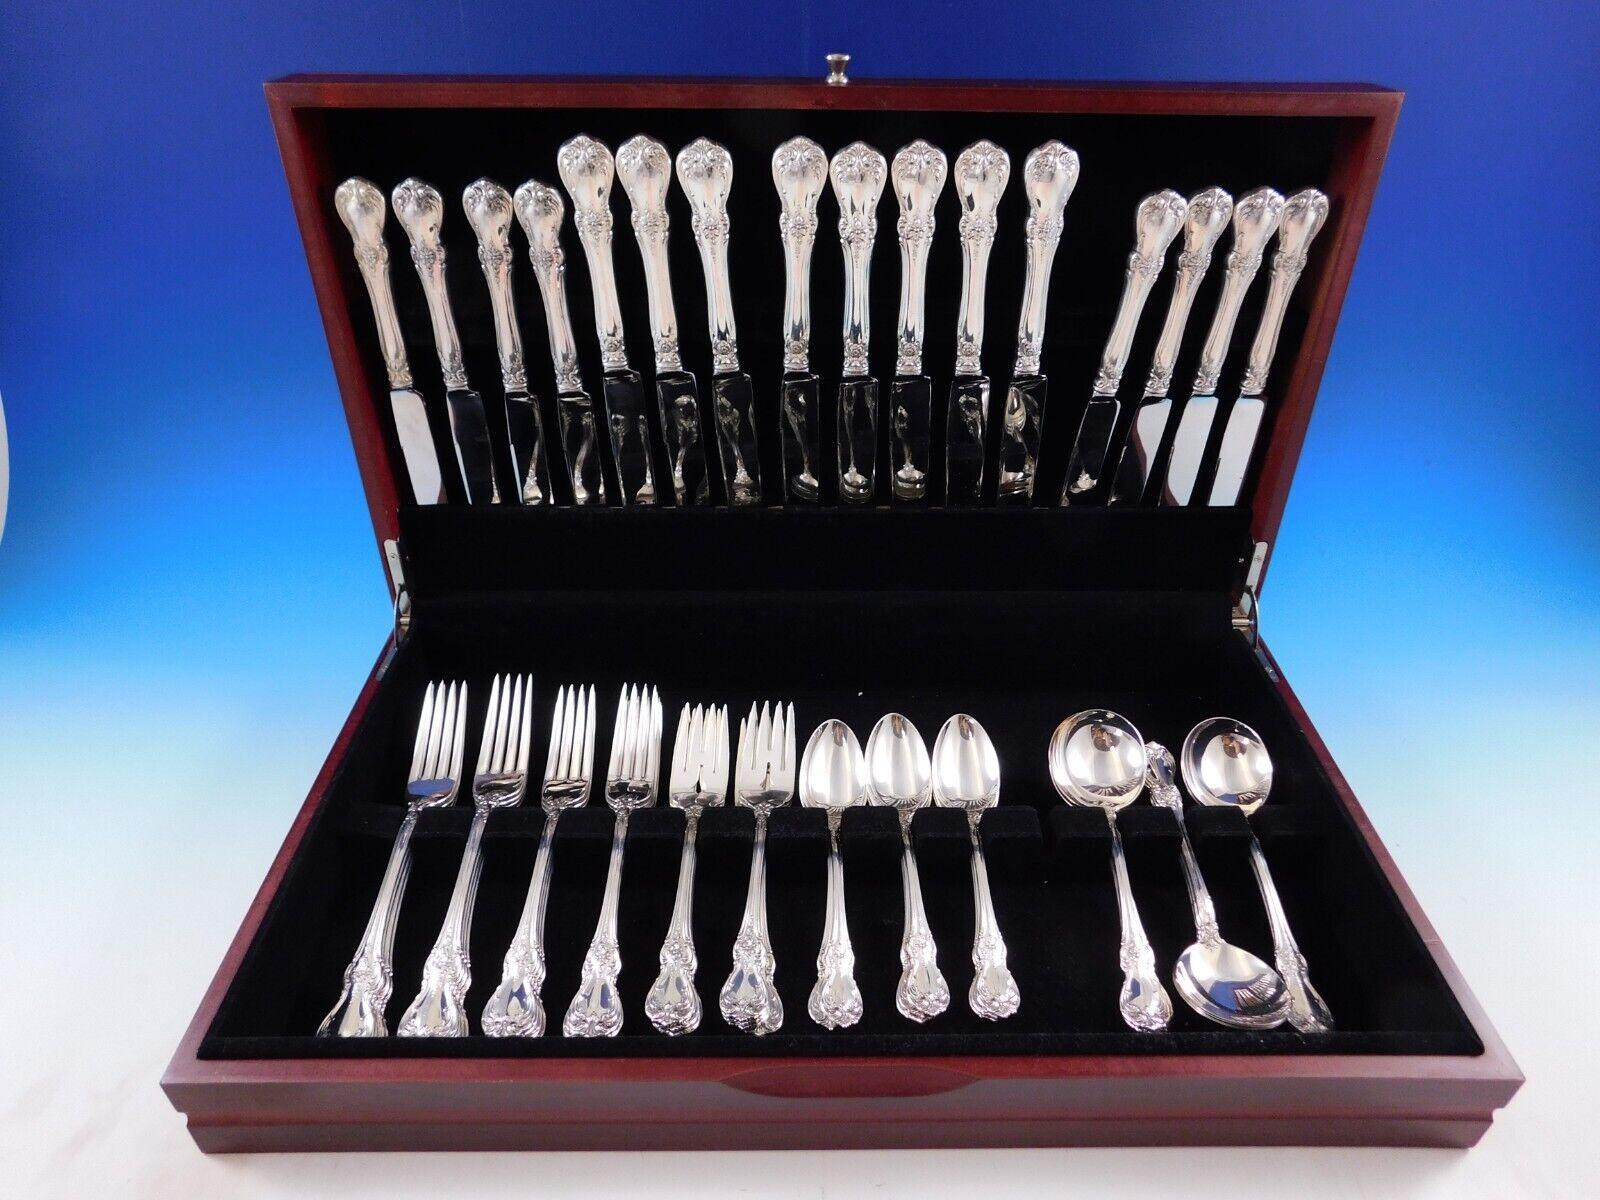 This graceful pattern designed by master silversmith Harold E. Nock is styled in the Old Victorian tradition, with refined lines and a restrained decoration popular in the early Victorian era. Introduced in 1942, it features a distinctive